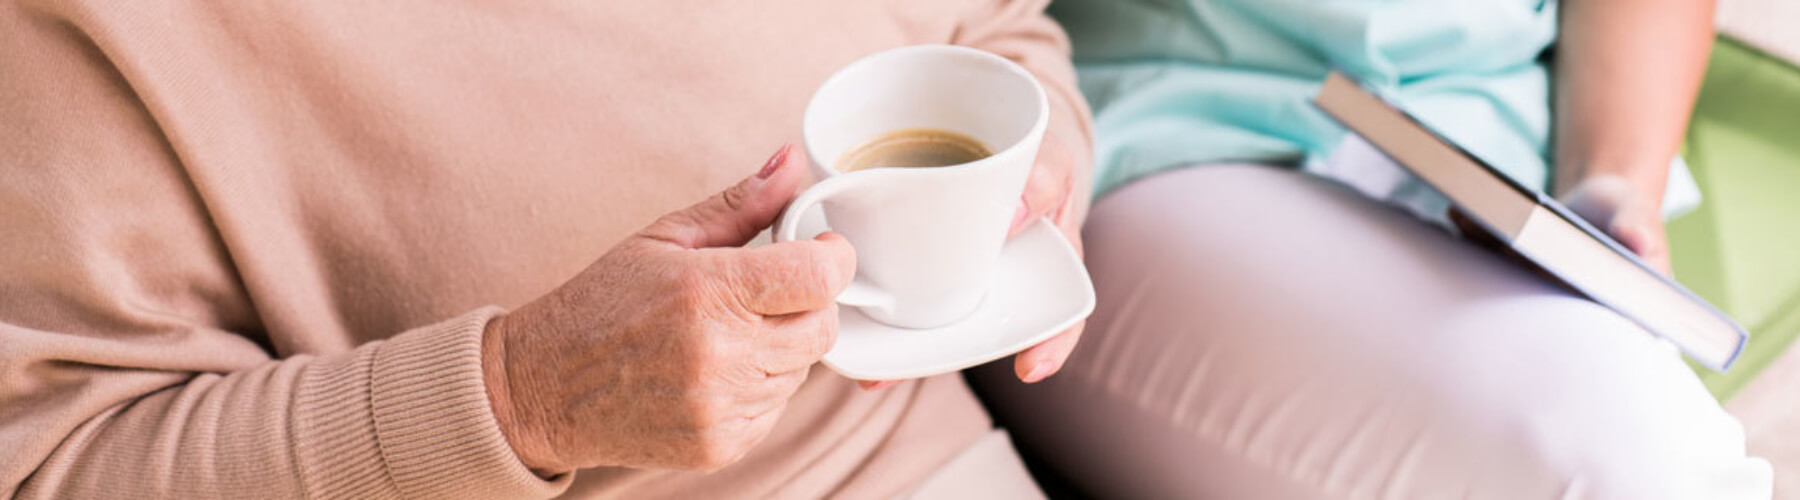 Nursing home patient, holding coffee